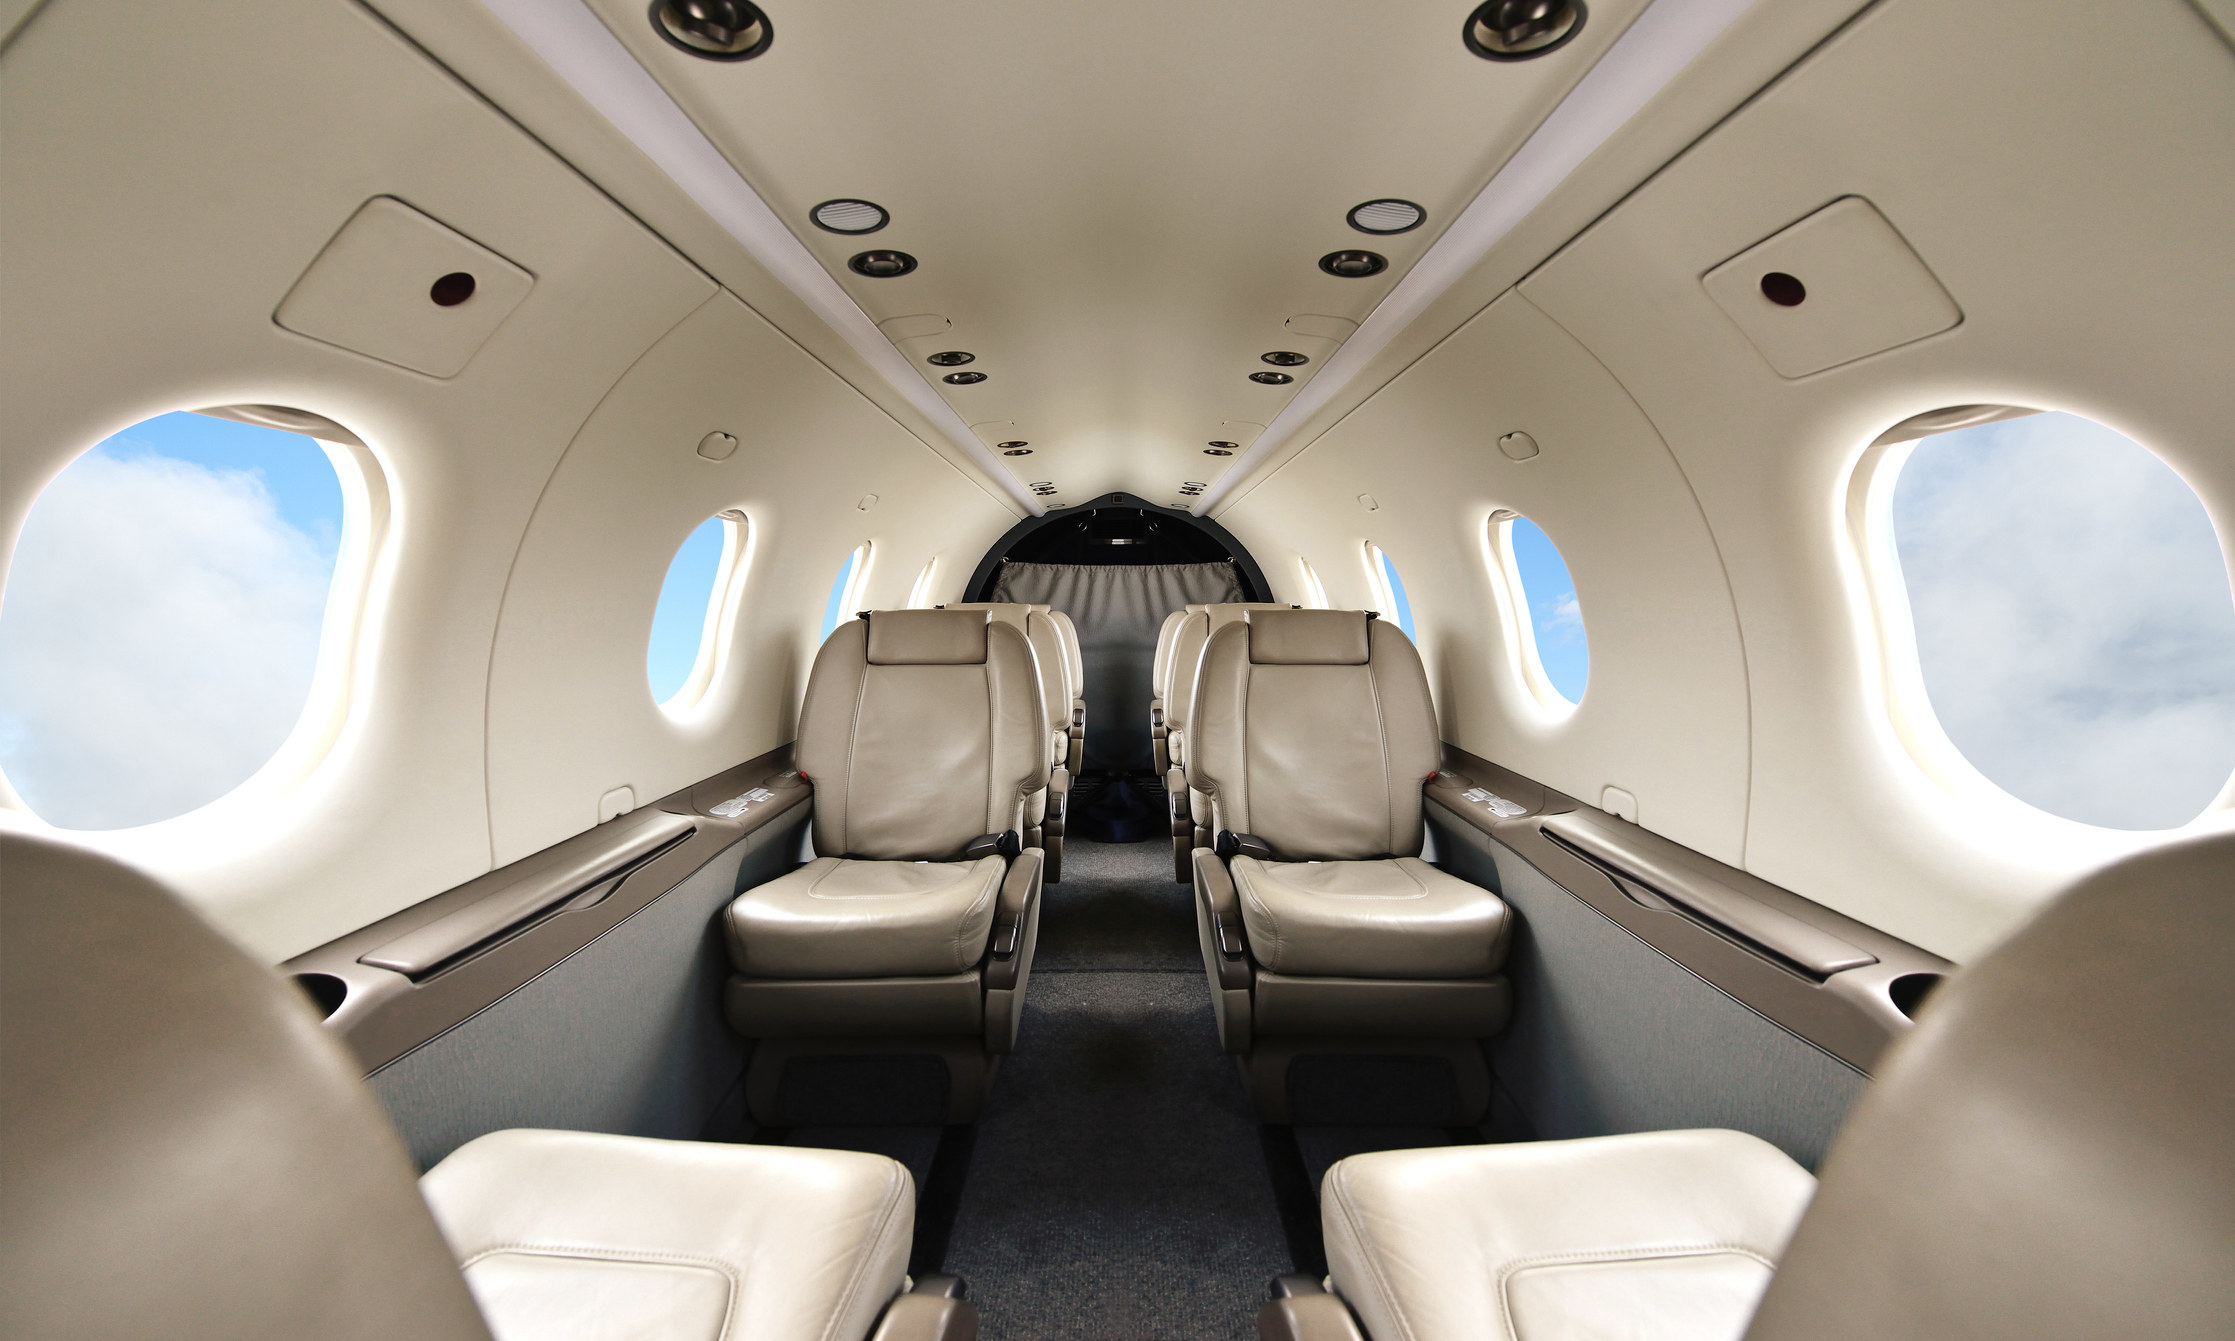 The inside of a private plane